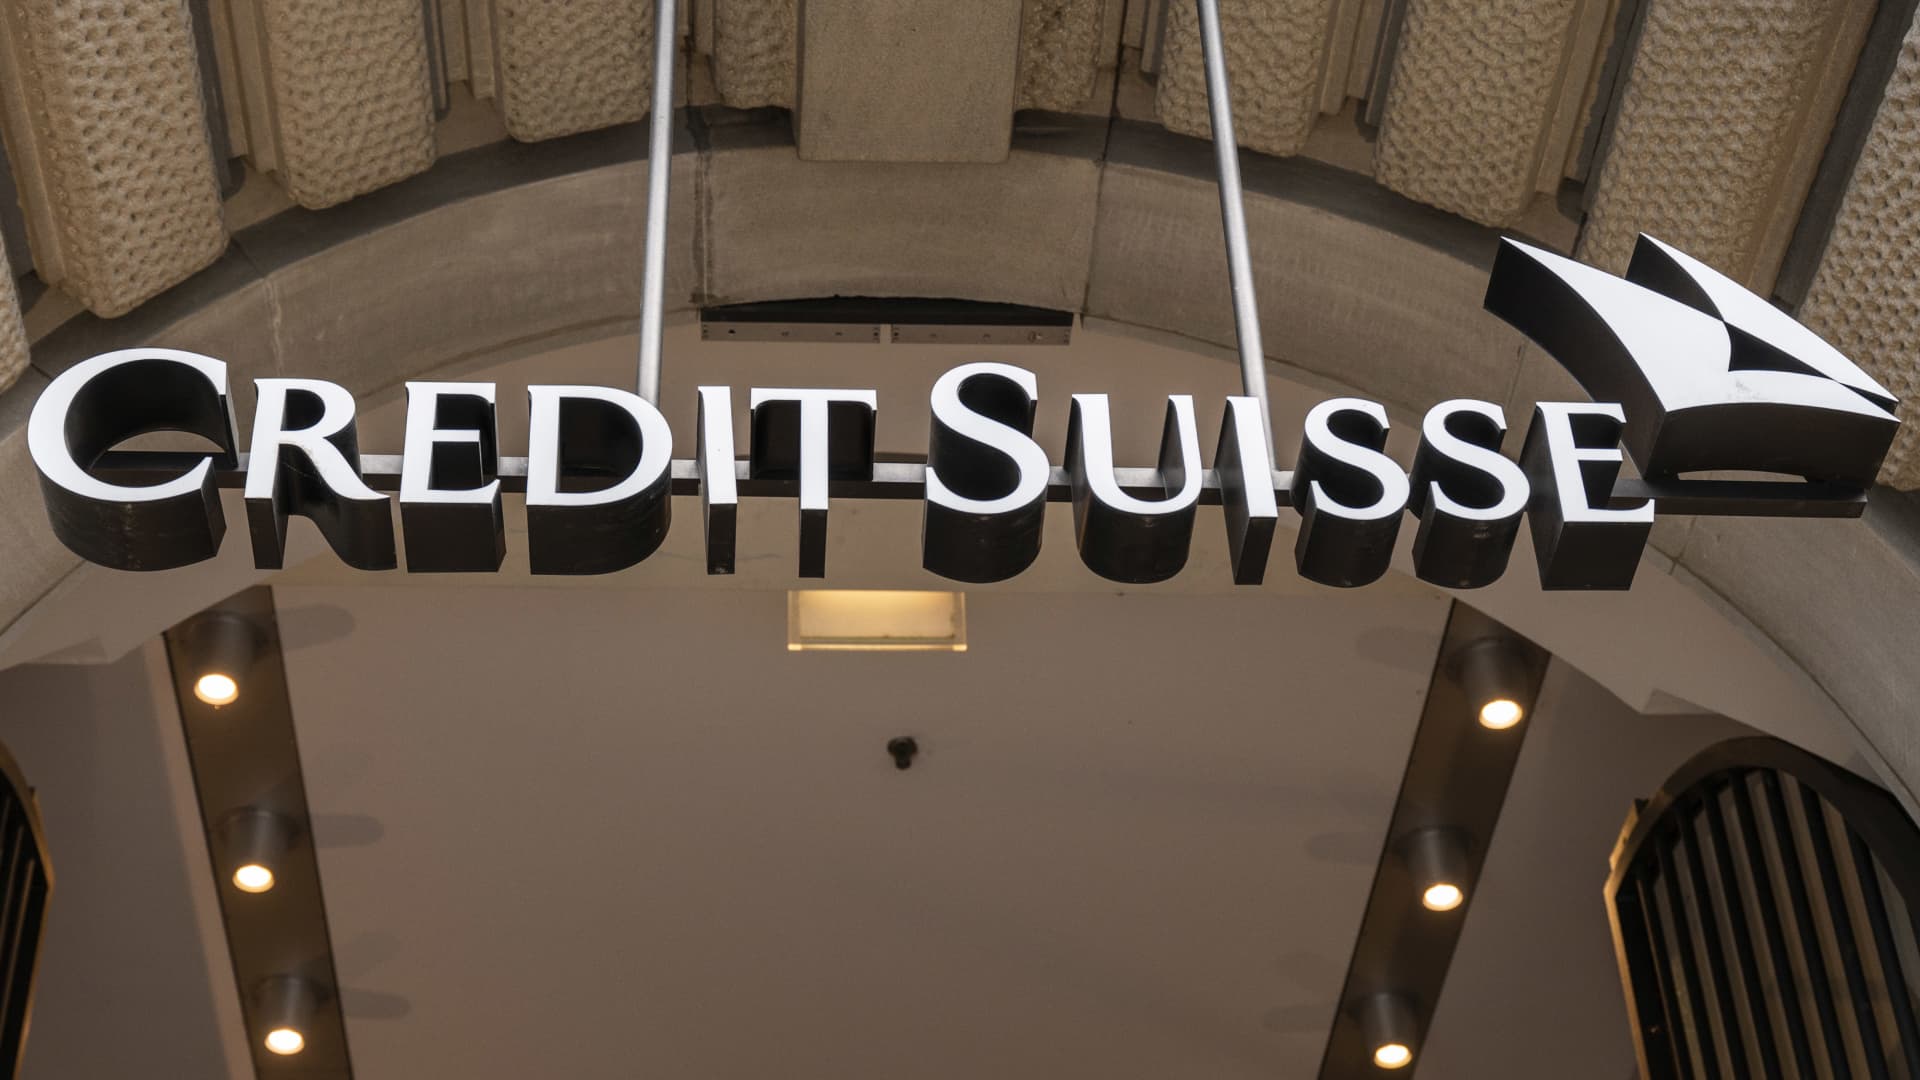 Credit Suisse is not about to cause a Lehman moment, economist Sri-Kumar says